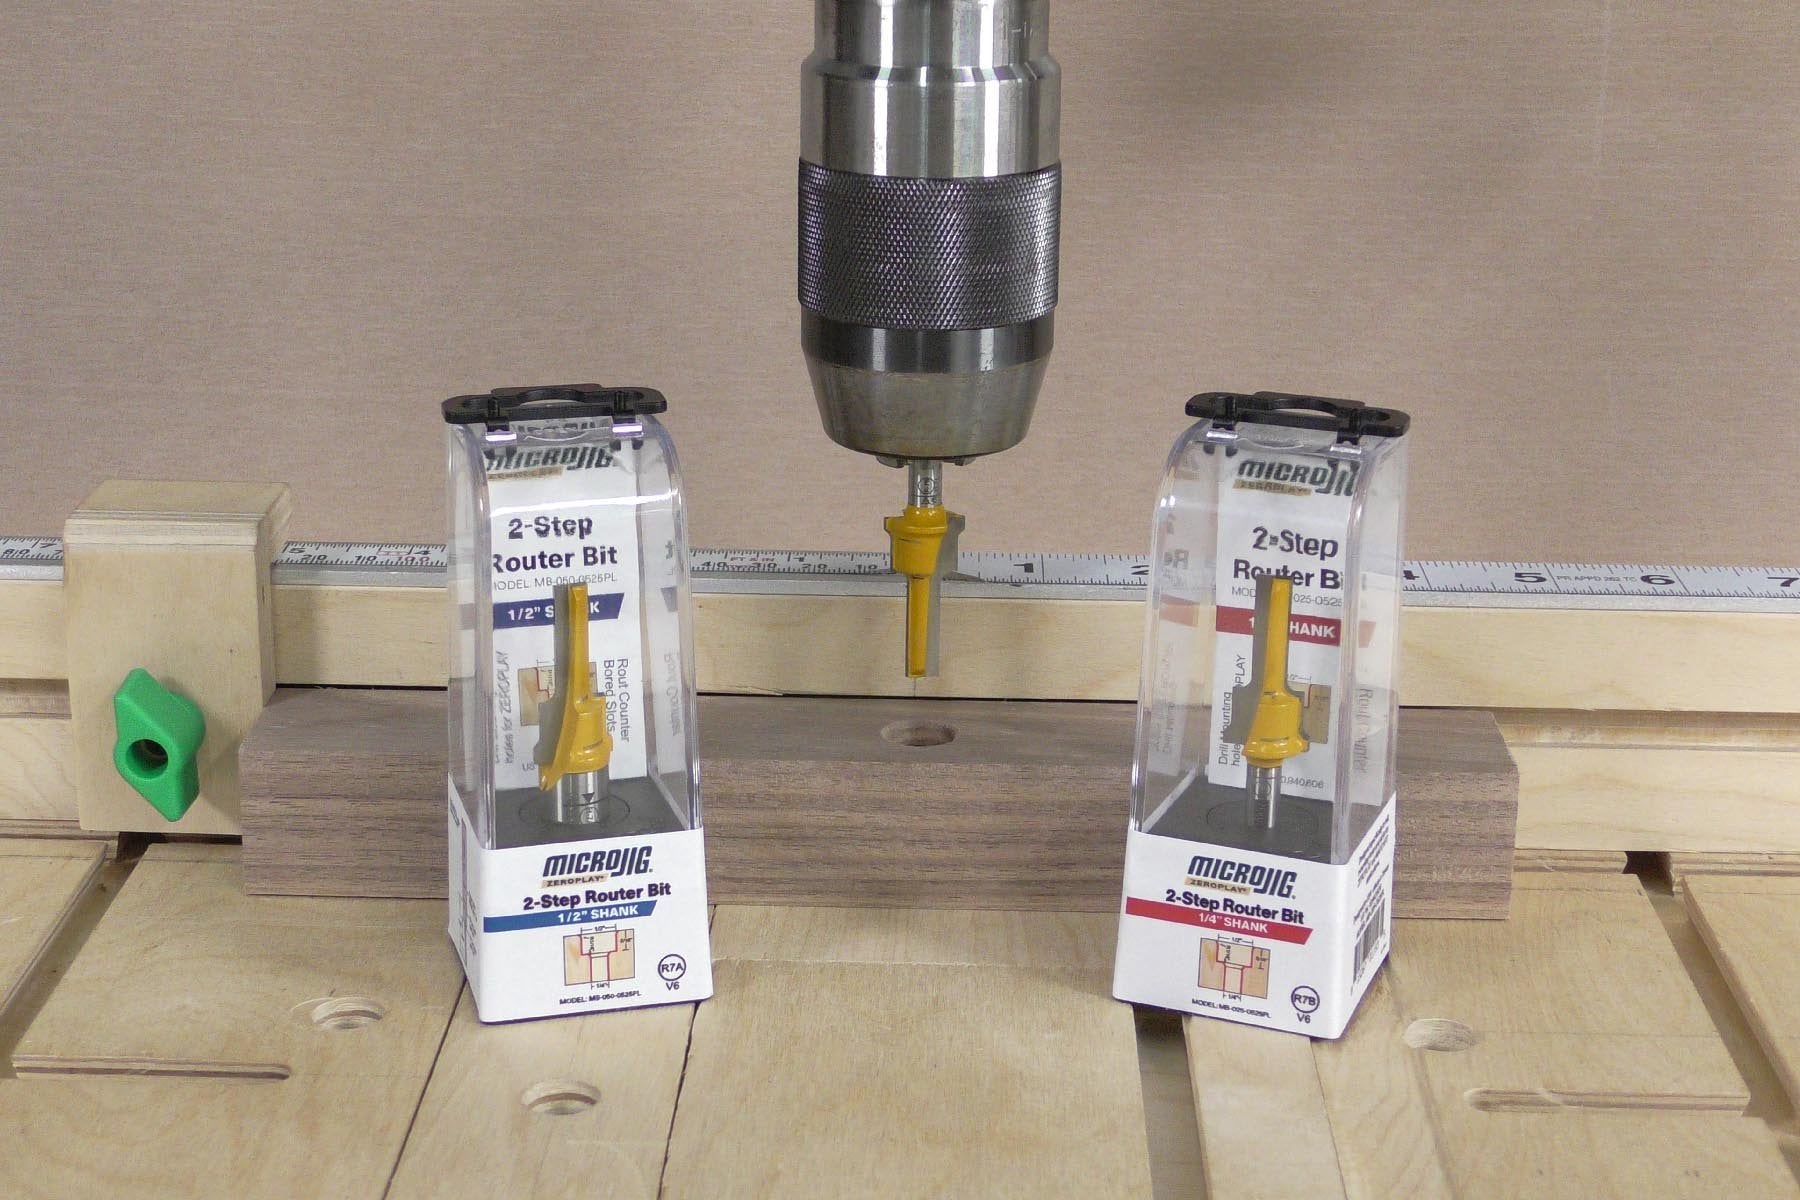 MICROJIG MB-050-025ST  - ZEROPLAY 2-Step Router Bit